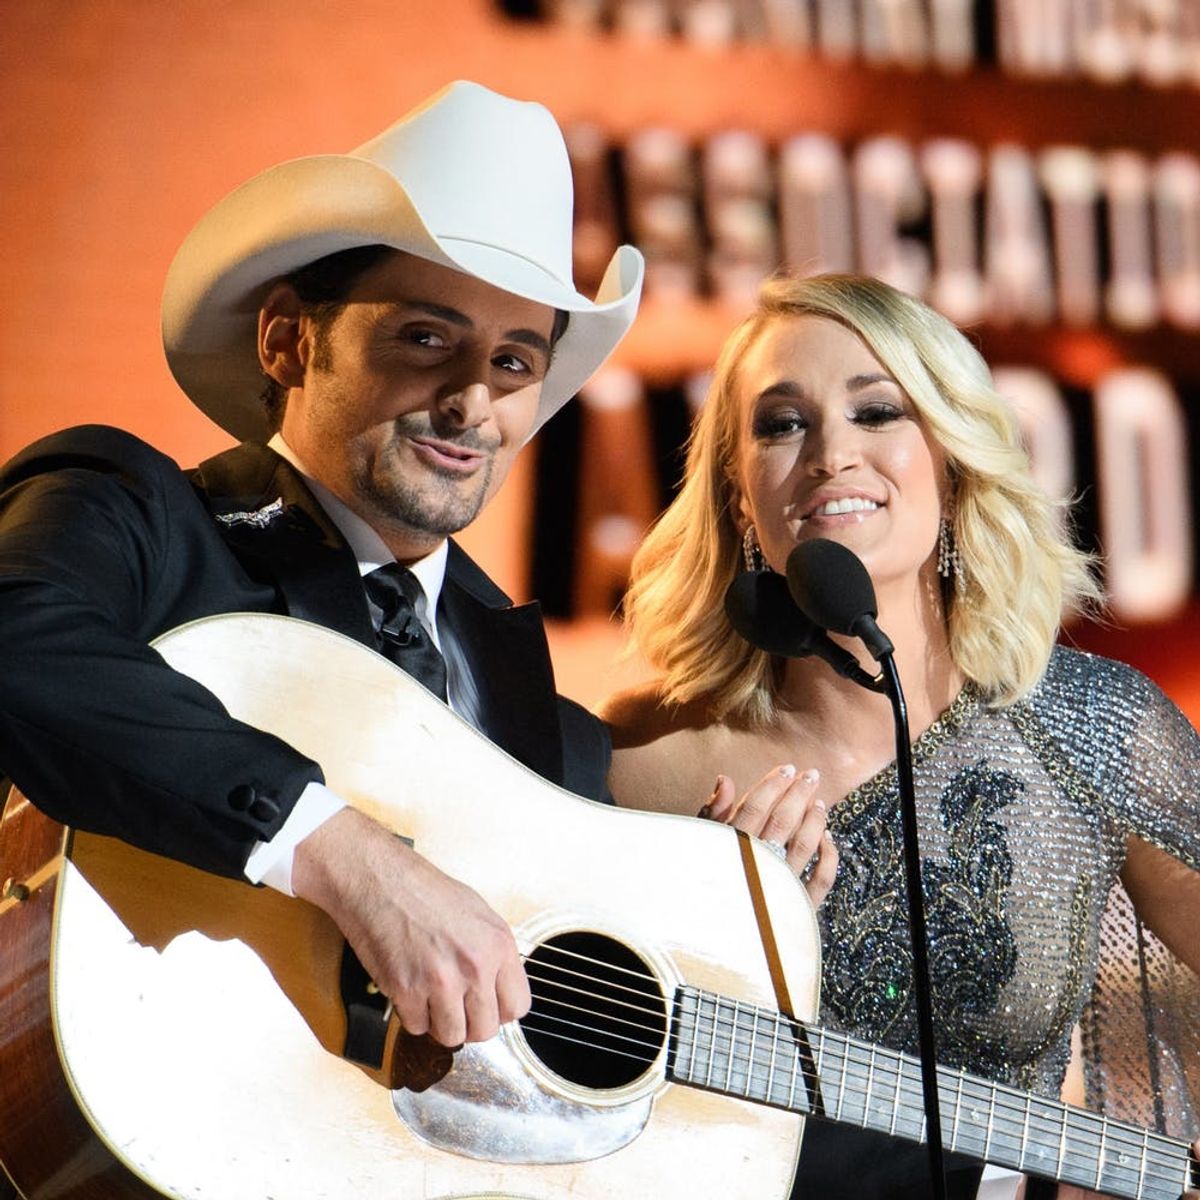 Here’s a Complete List of Winners and Nominees from the 2017 CMA Awards